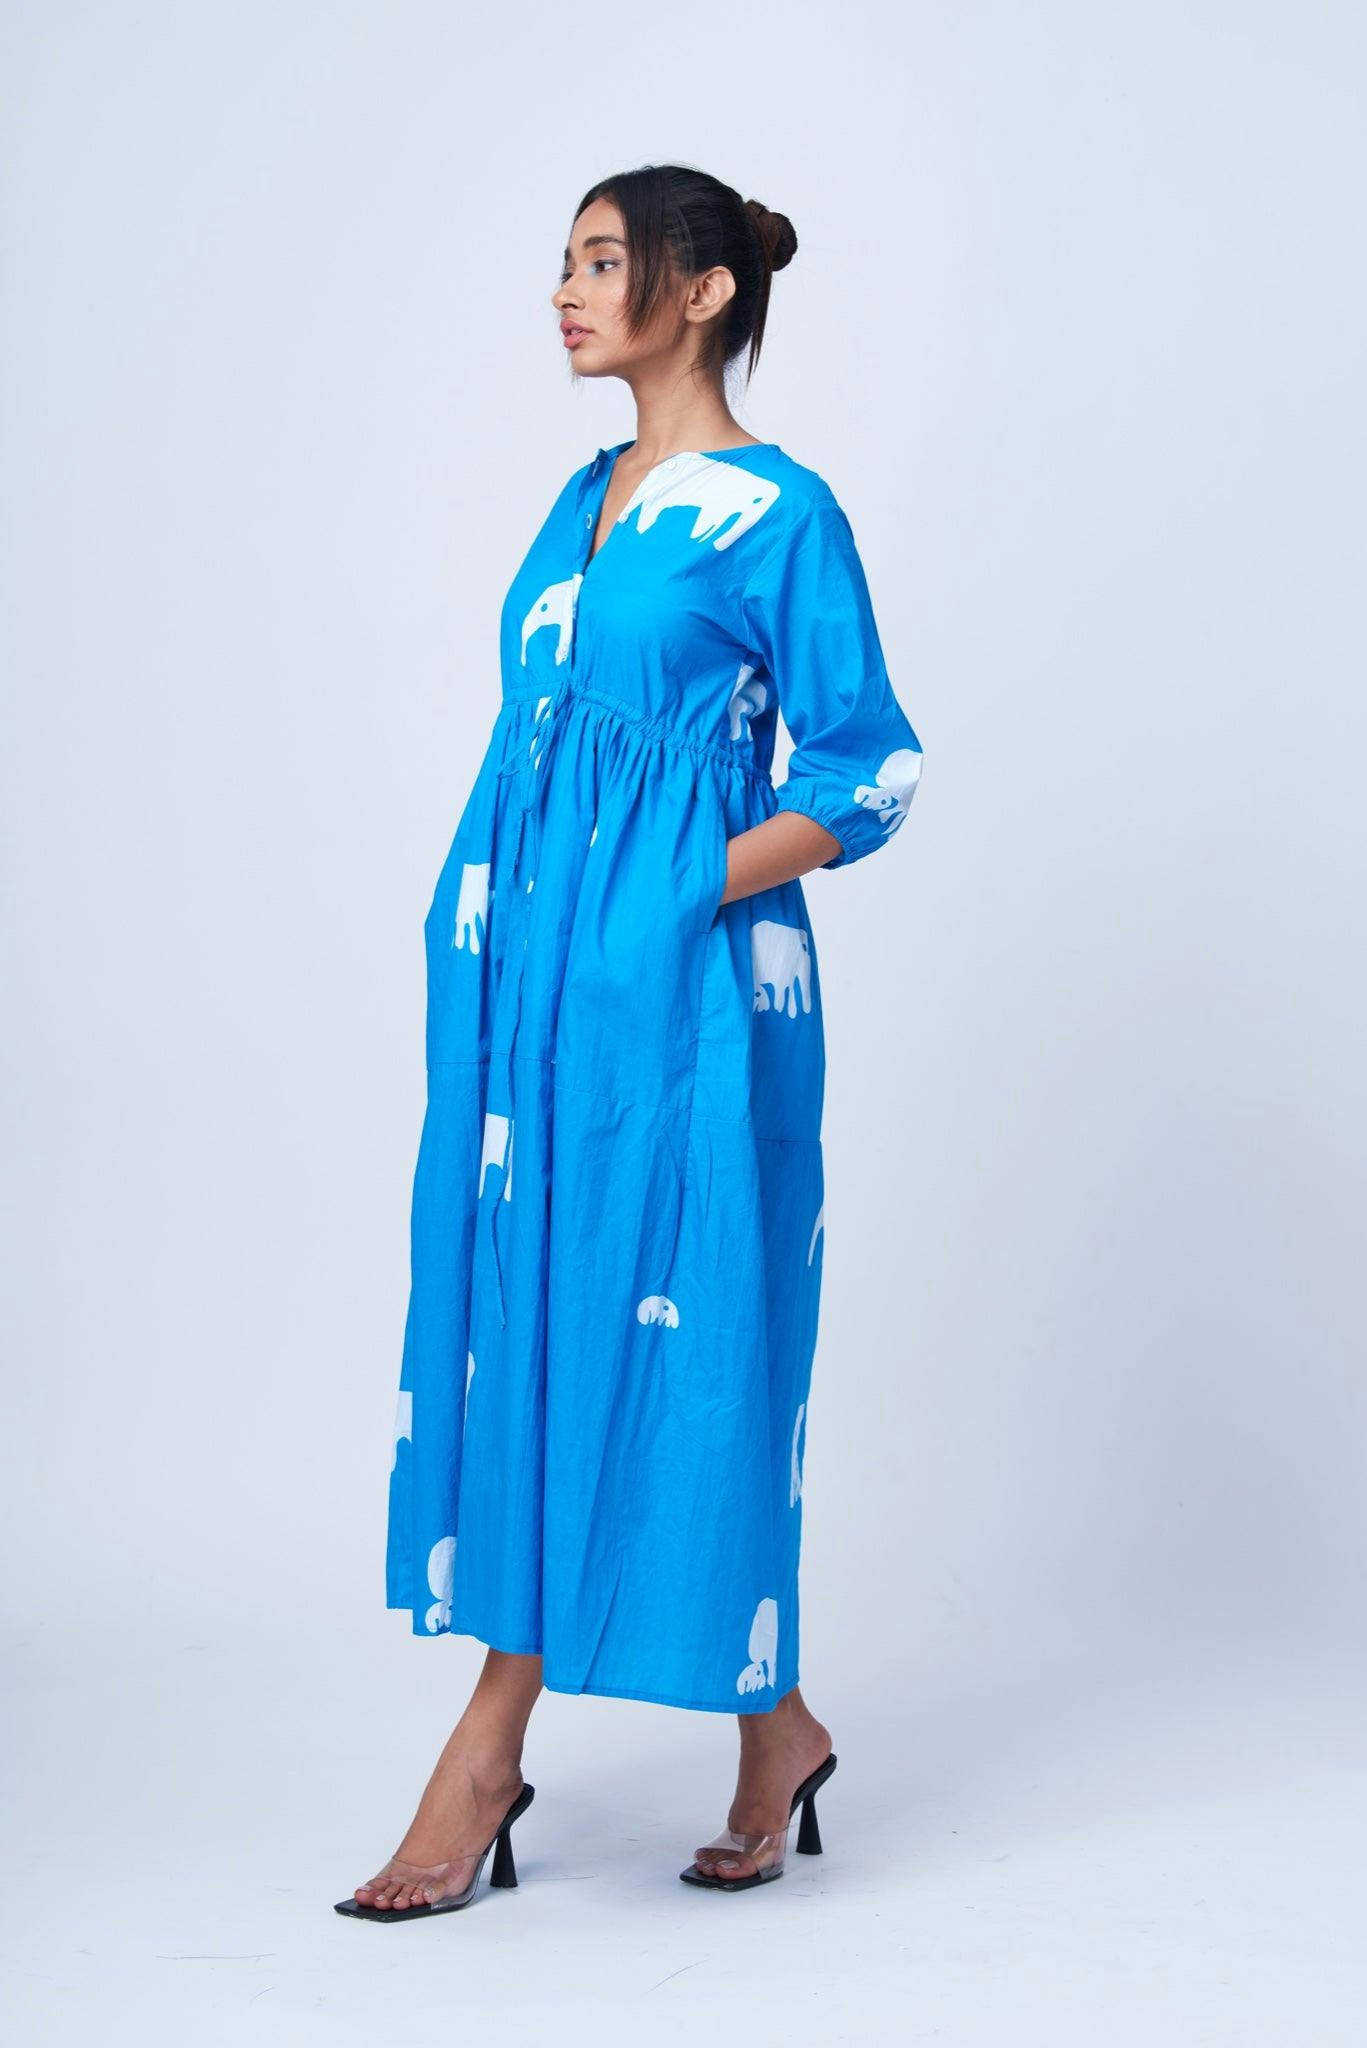 Elephant [maxi ], a product by Radharaman